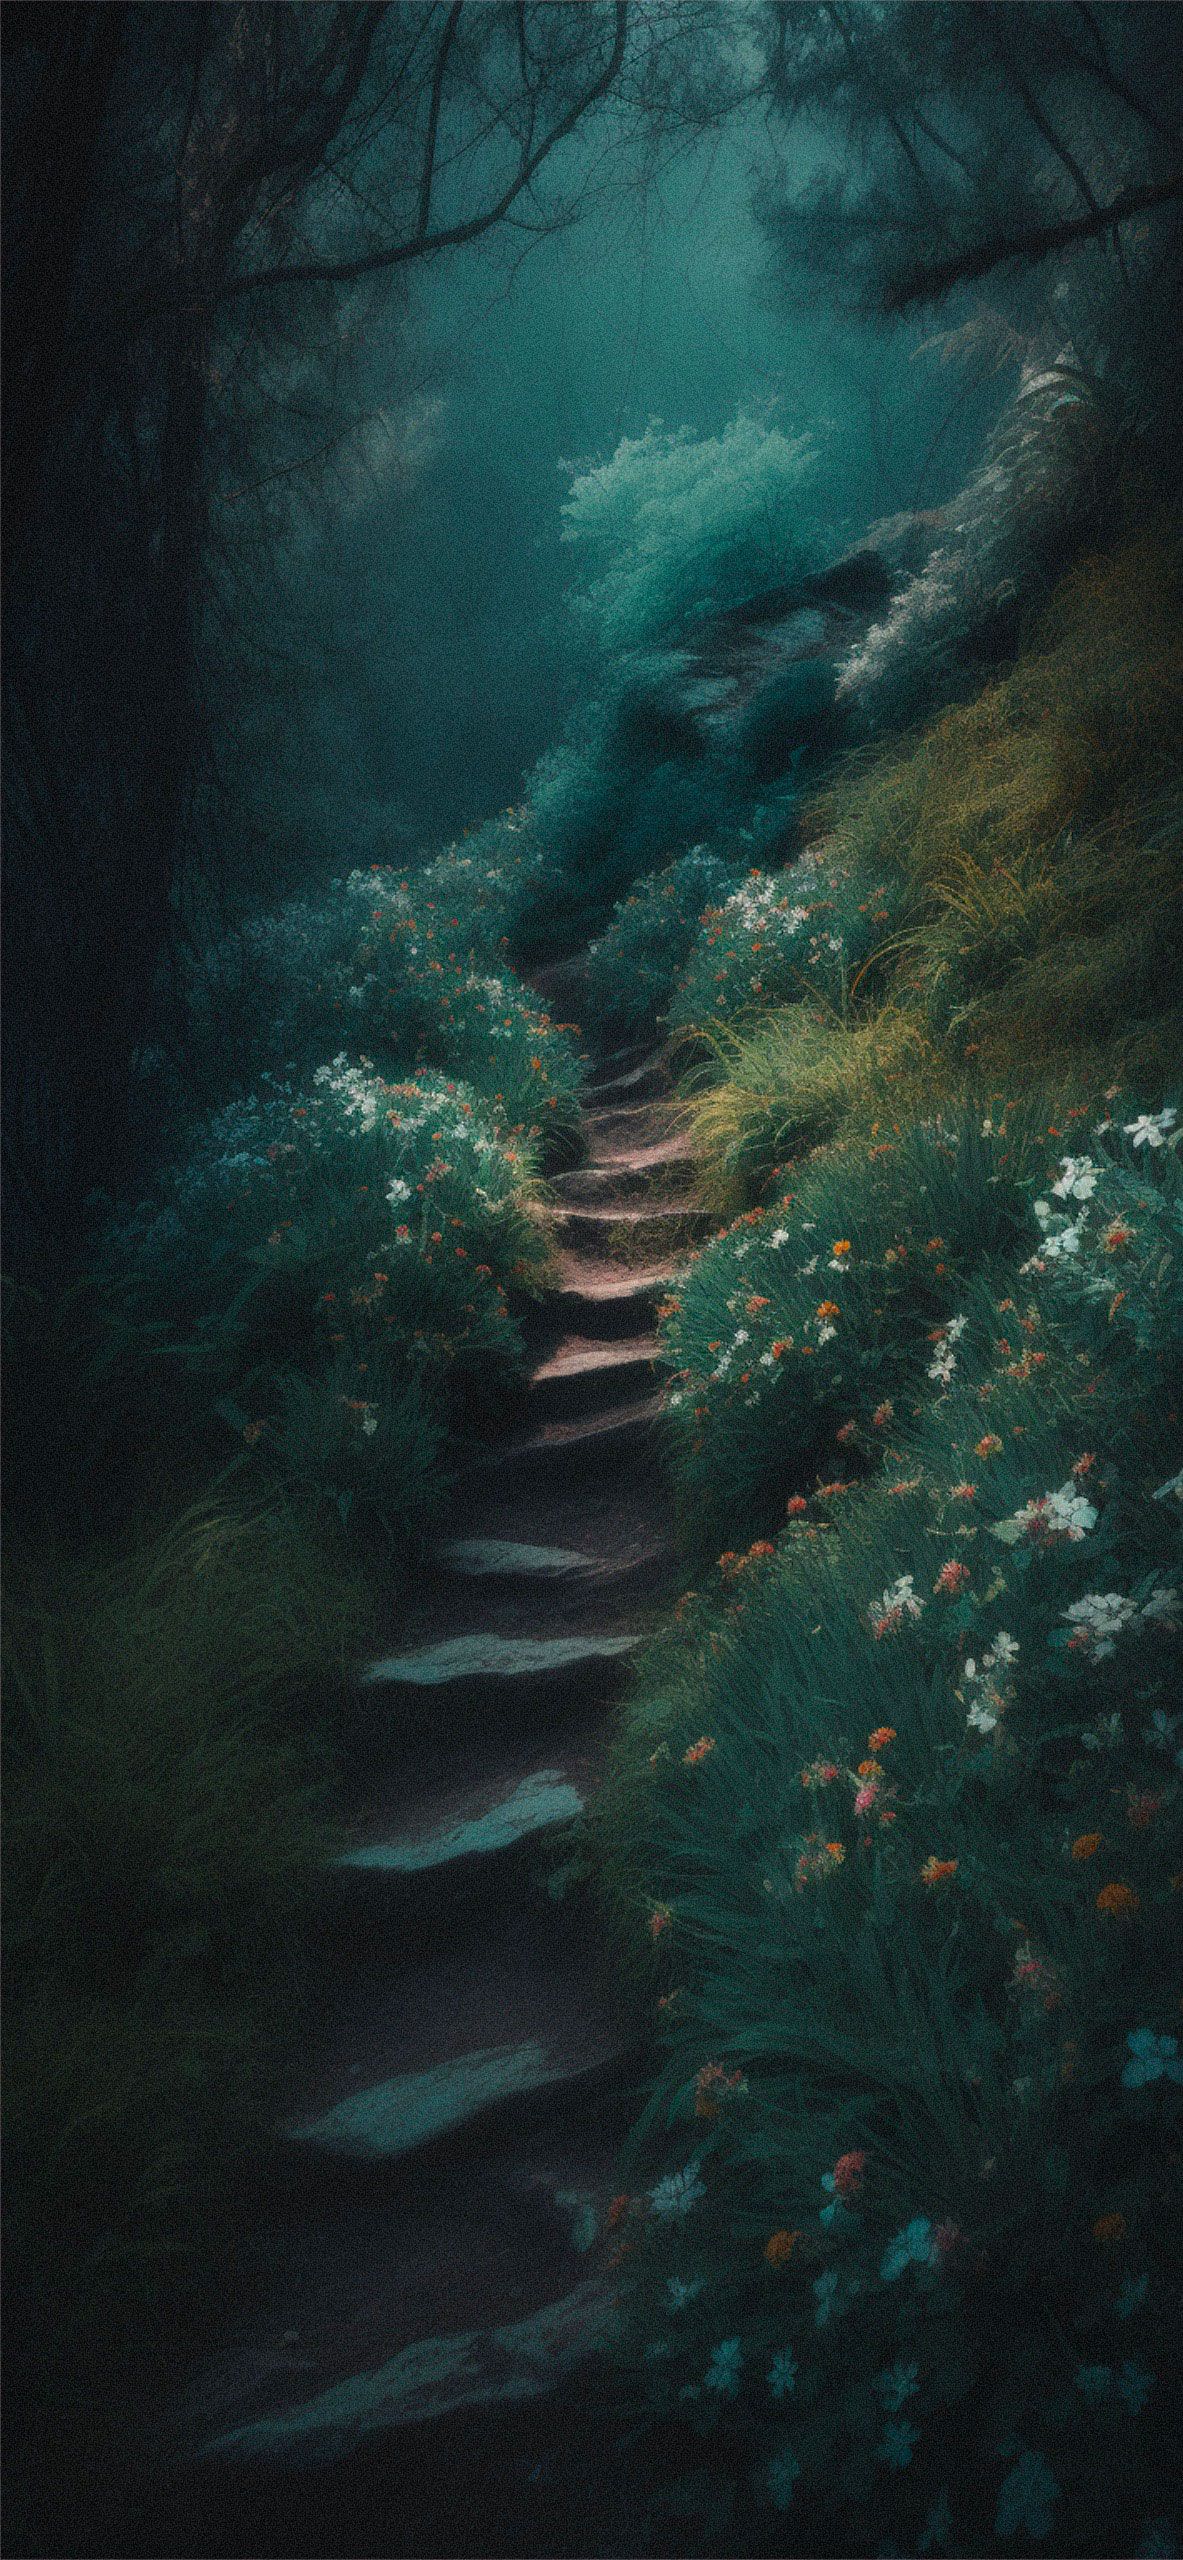 A stone staircase winds through a forest of flowers and trees. - Forest